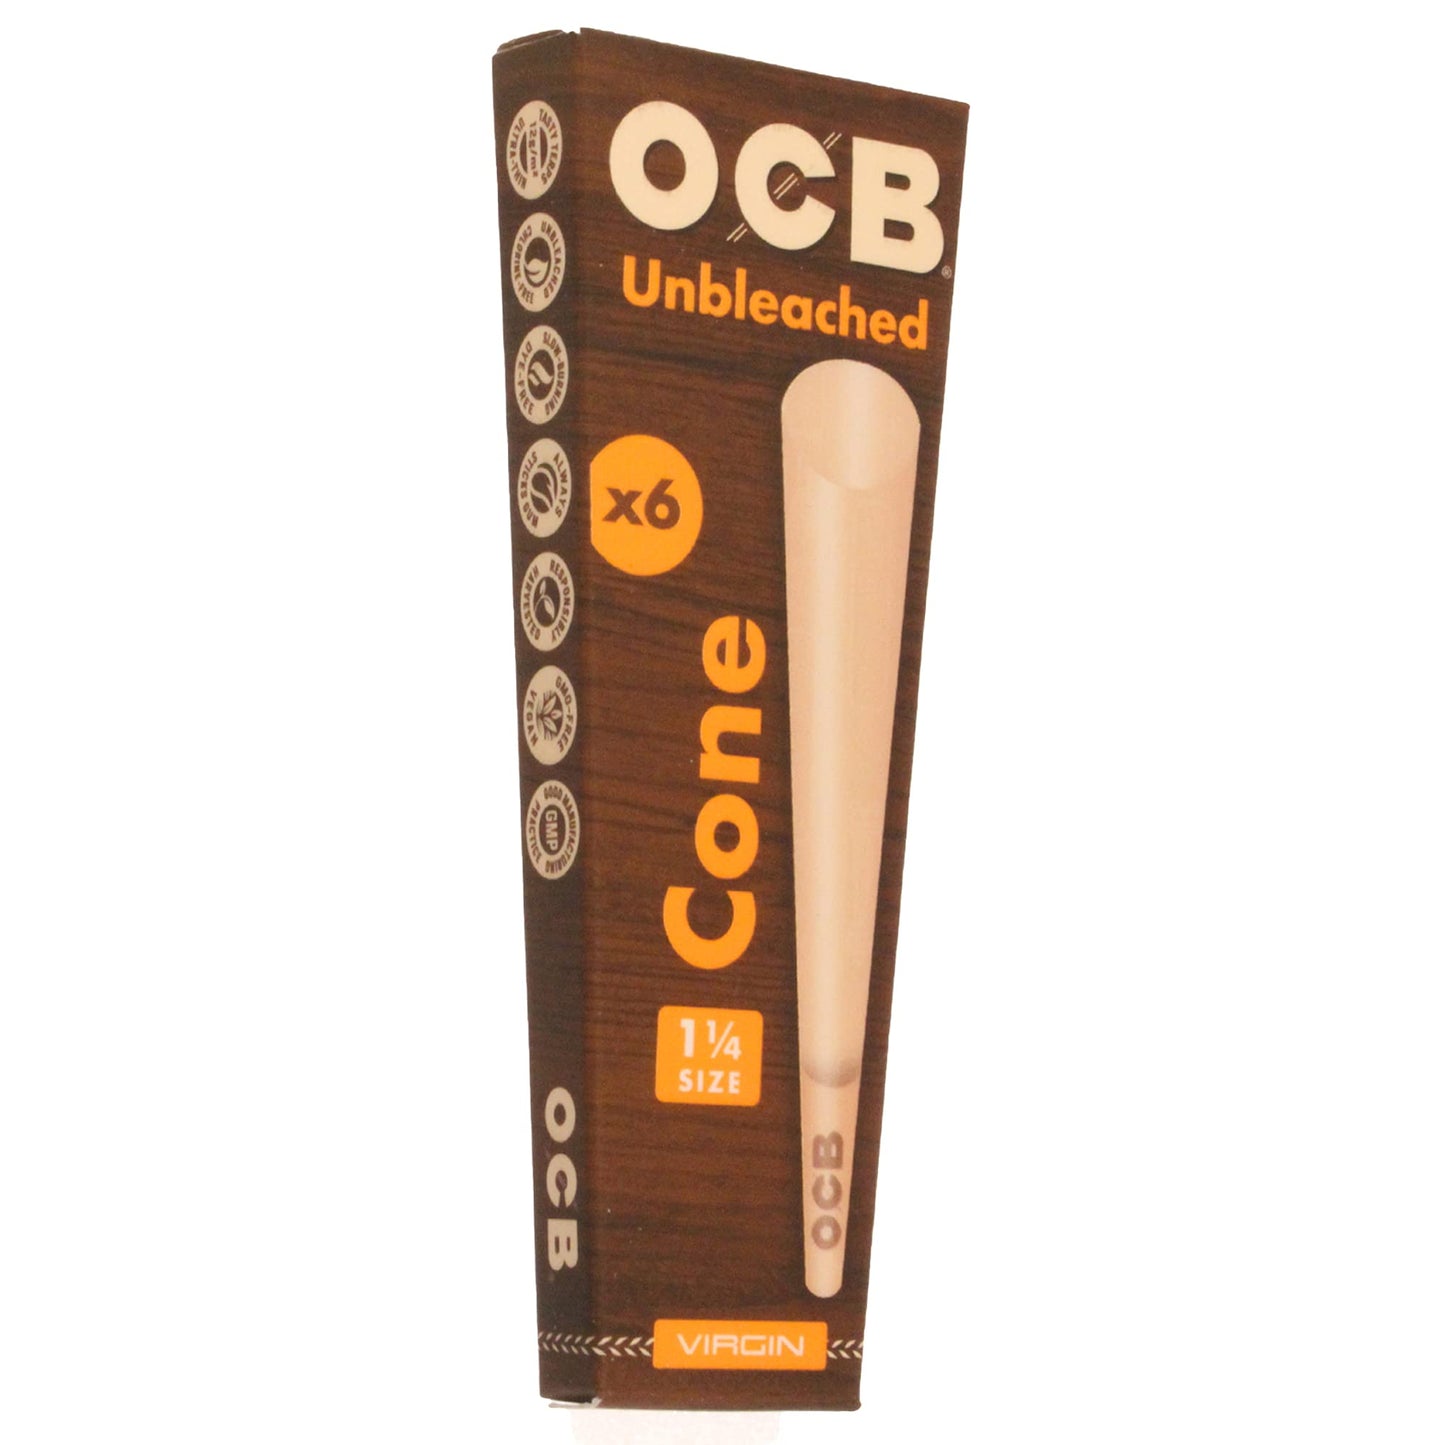 OCB Unbleached Cone (6 Count)